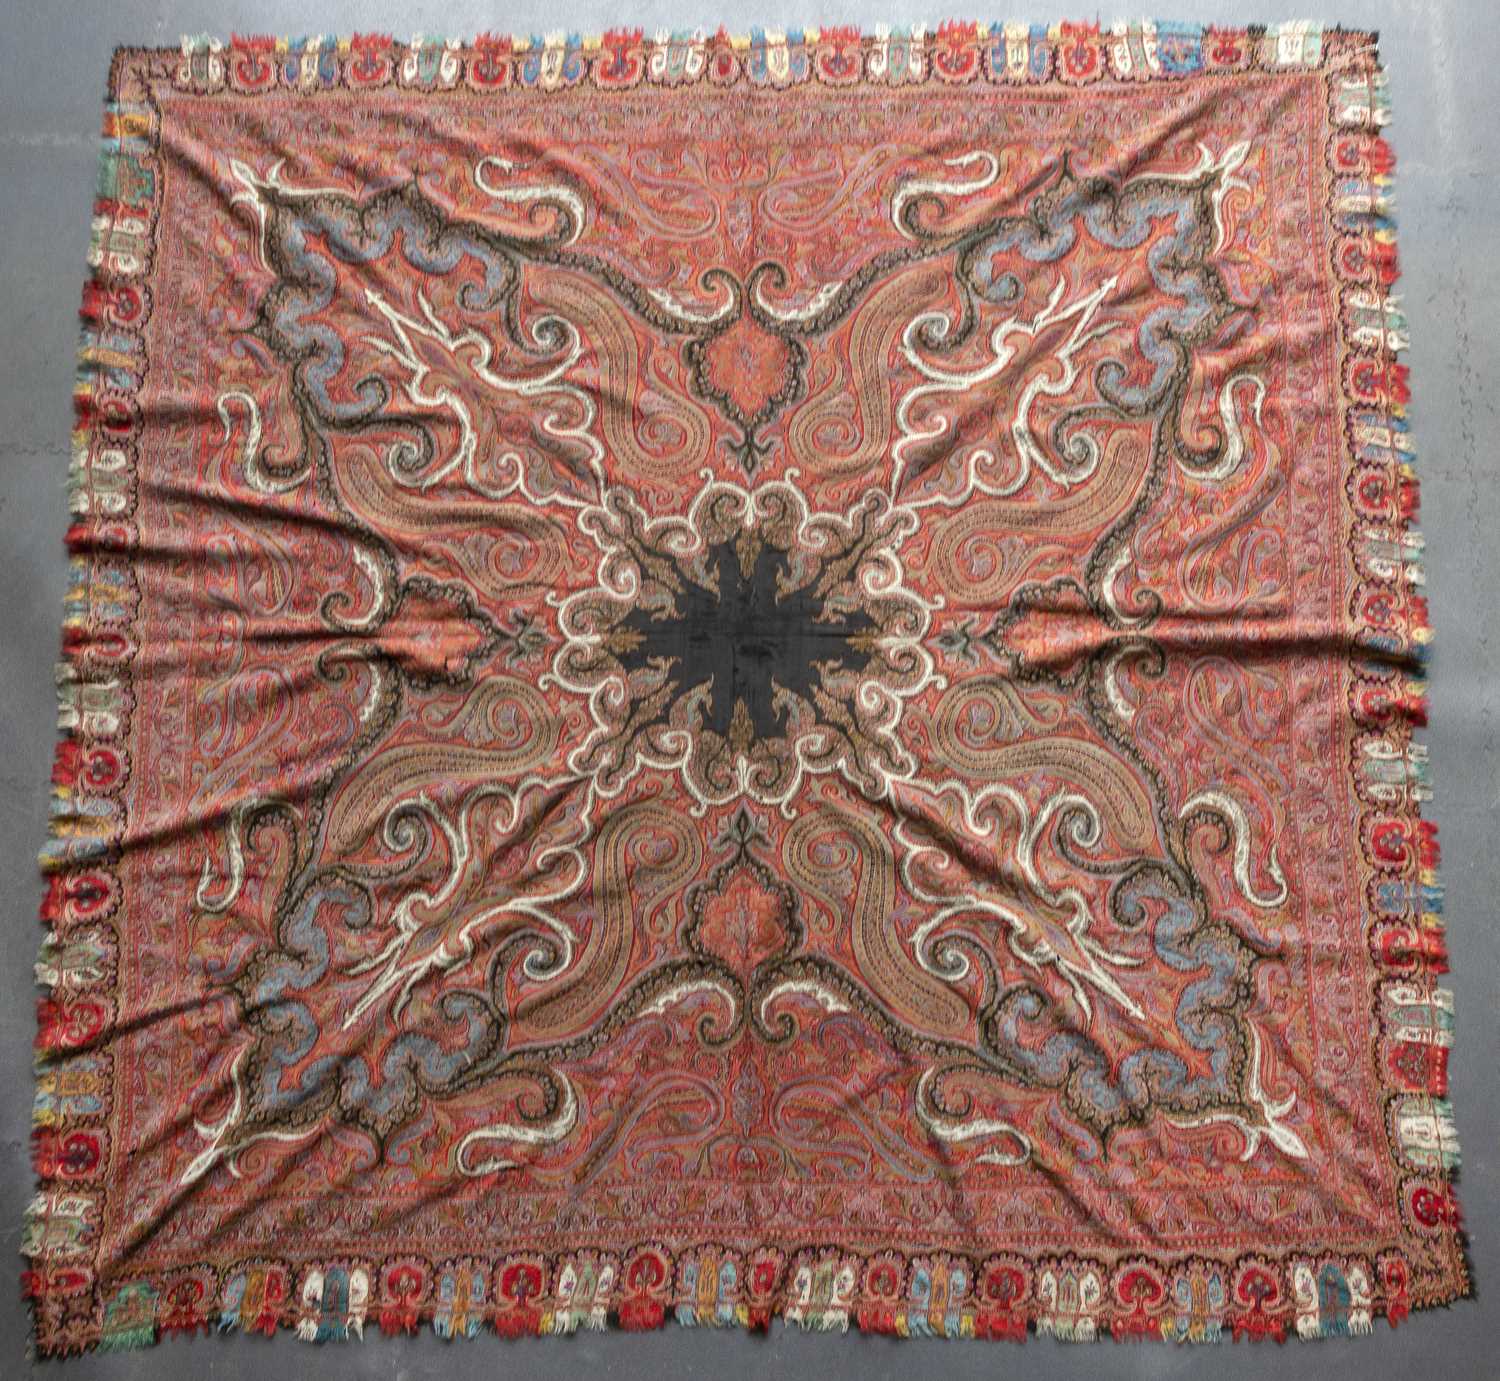 A 19th century Kashmiri shawl, the central black radiating medallion in a red field of scrolls